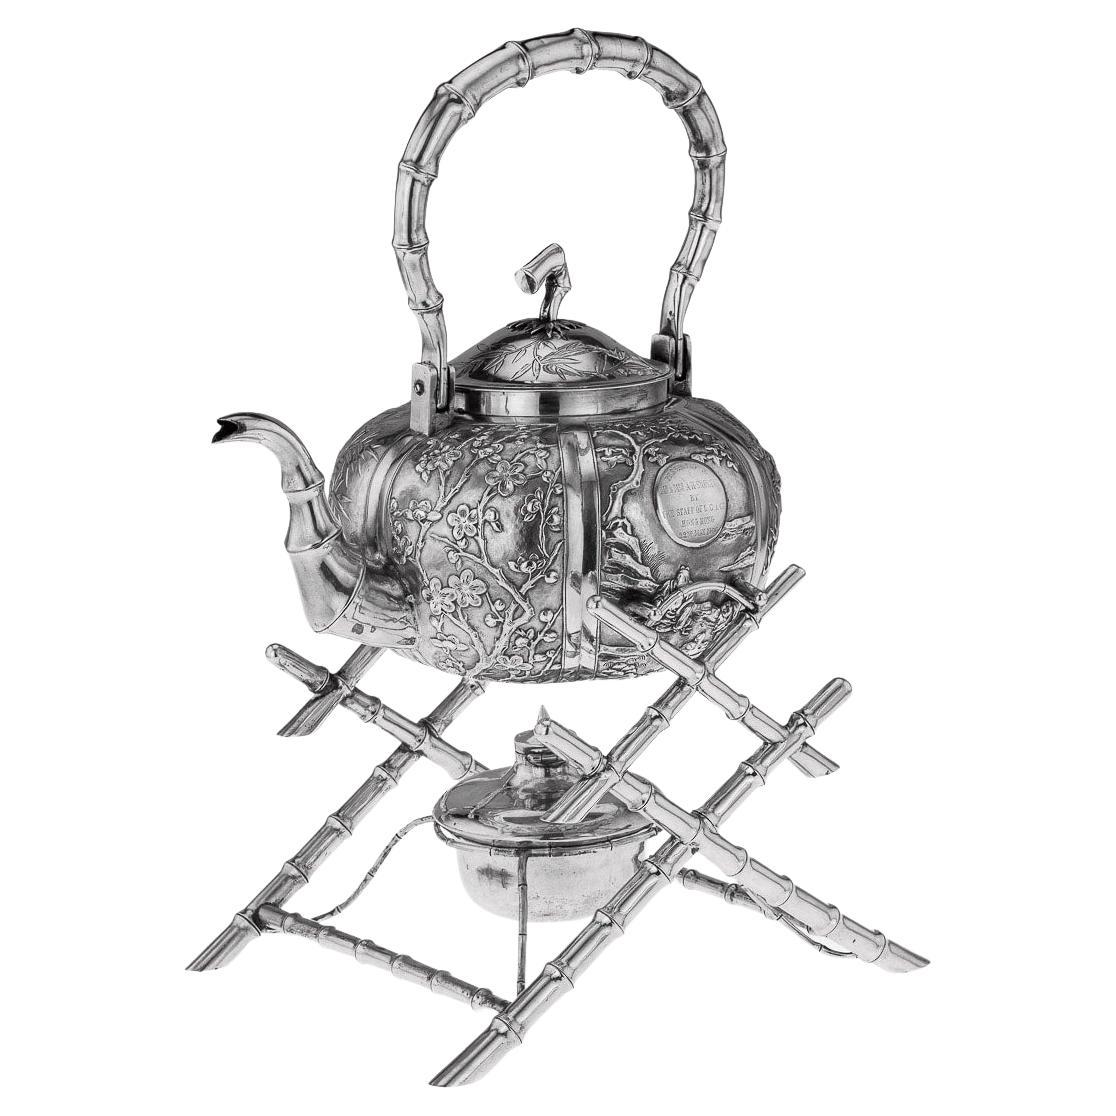 20th Century Chinese Export Solid Silver Kettle On Stand, Sun Shing, circa 1900 For Sale